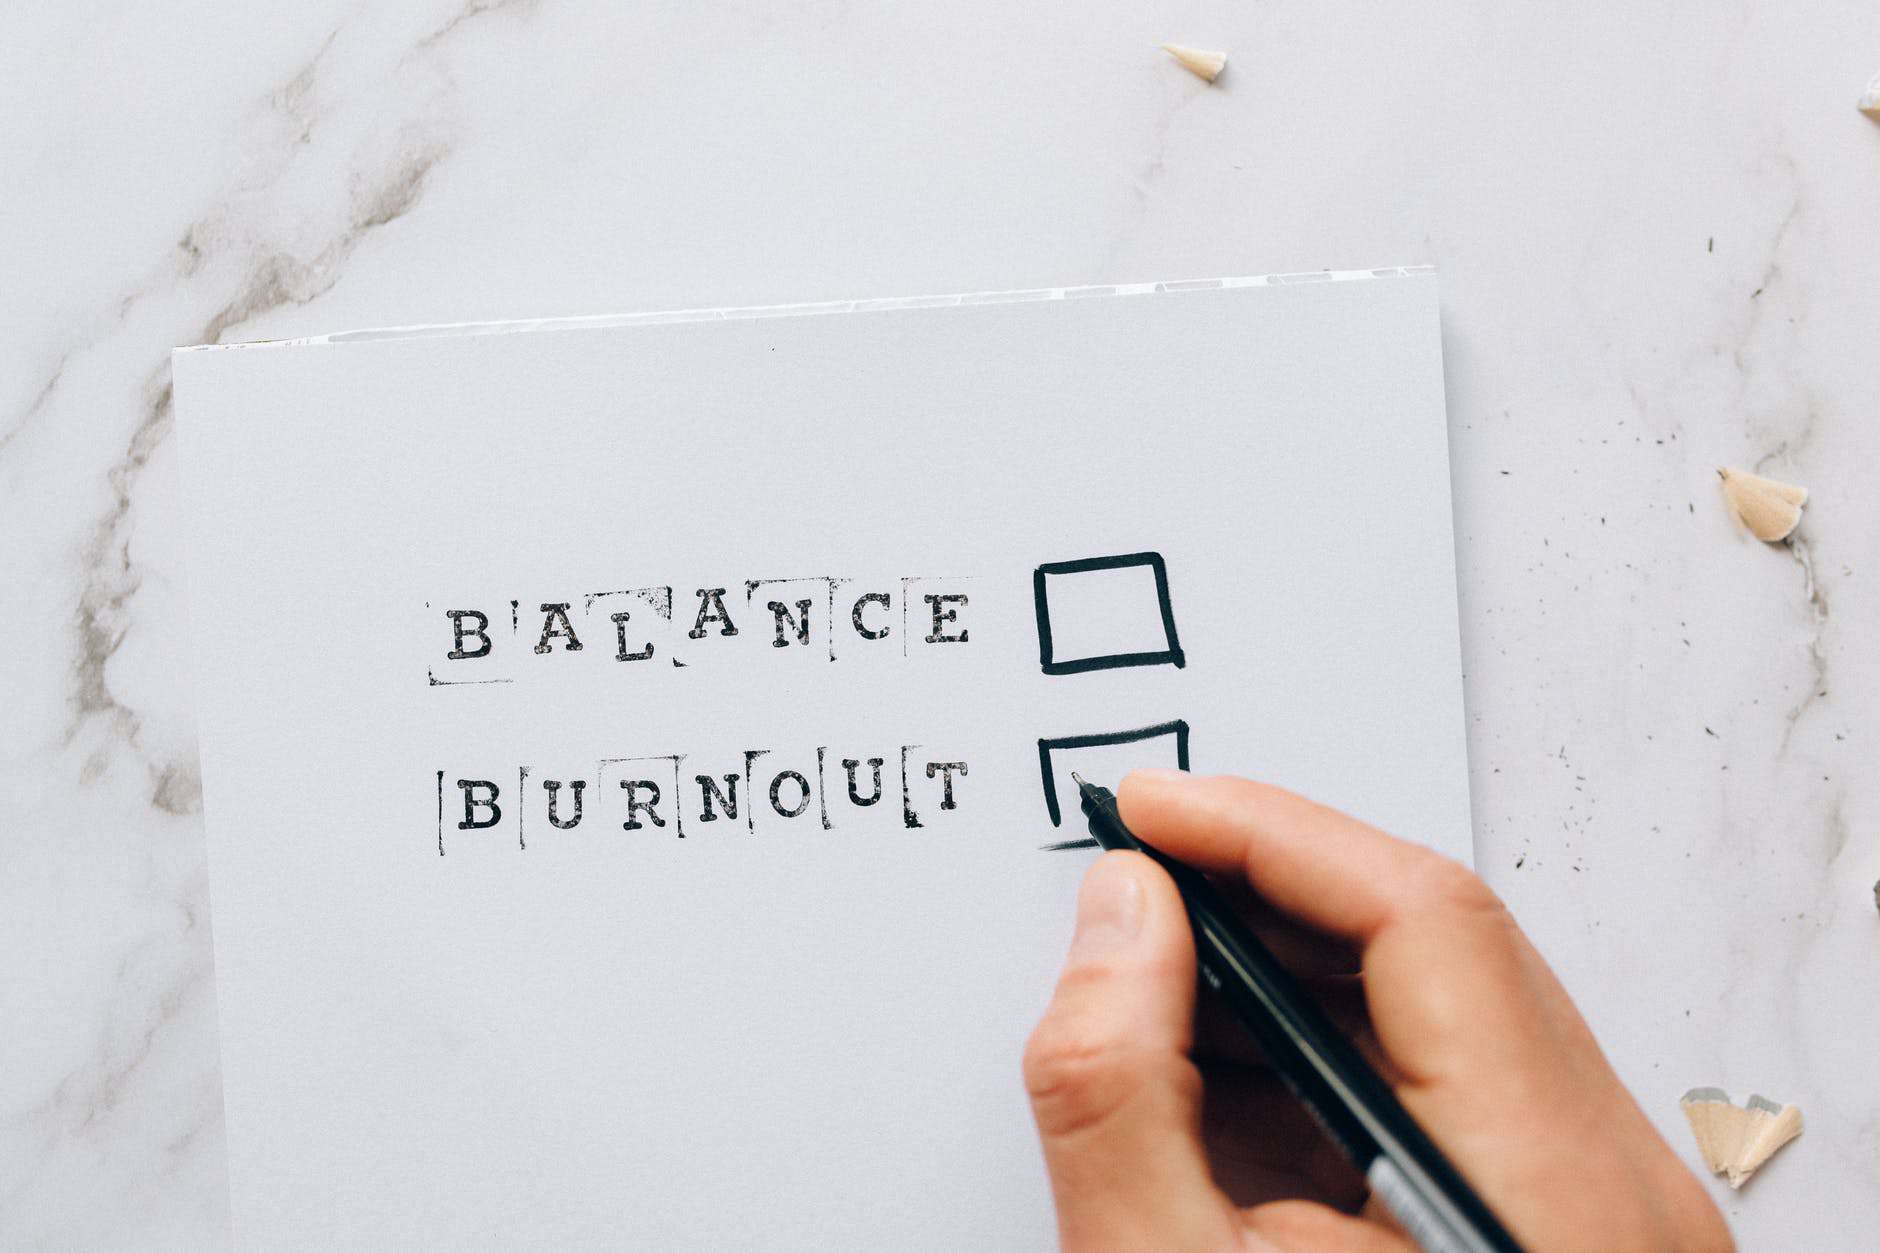 Picture representing the importance of time management: A piece of paper on a marbletop table saying "Balance" and "Burnout" with a tick box next to each. A hand with a pen is hovering over the tickbox next to "Burnout". On the right side of the image, there are pencil shreds all over the table.